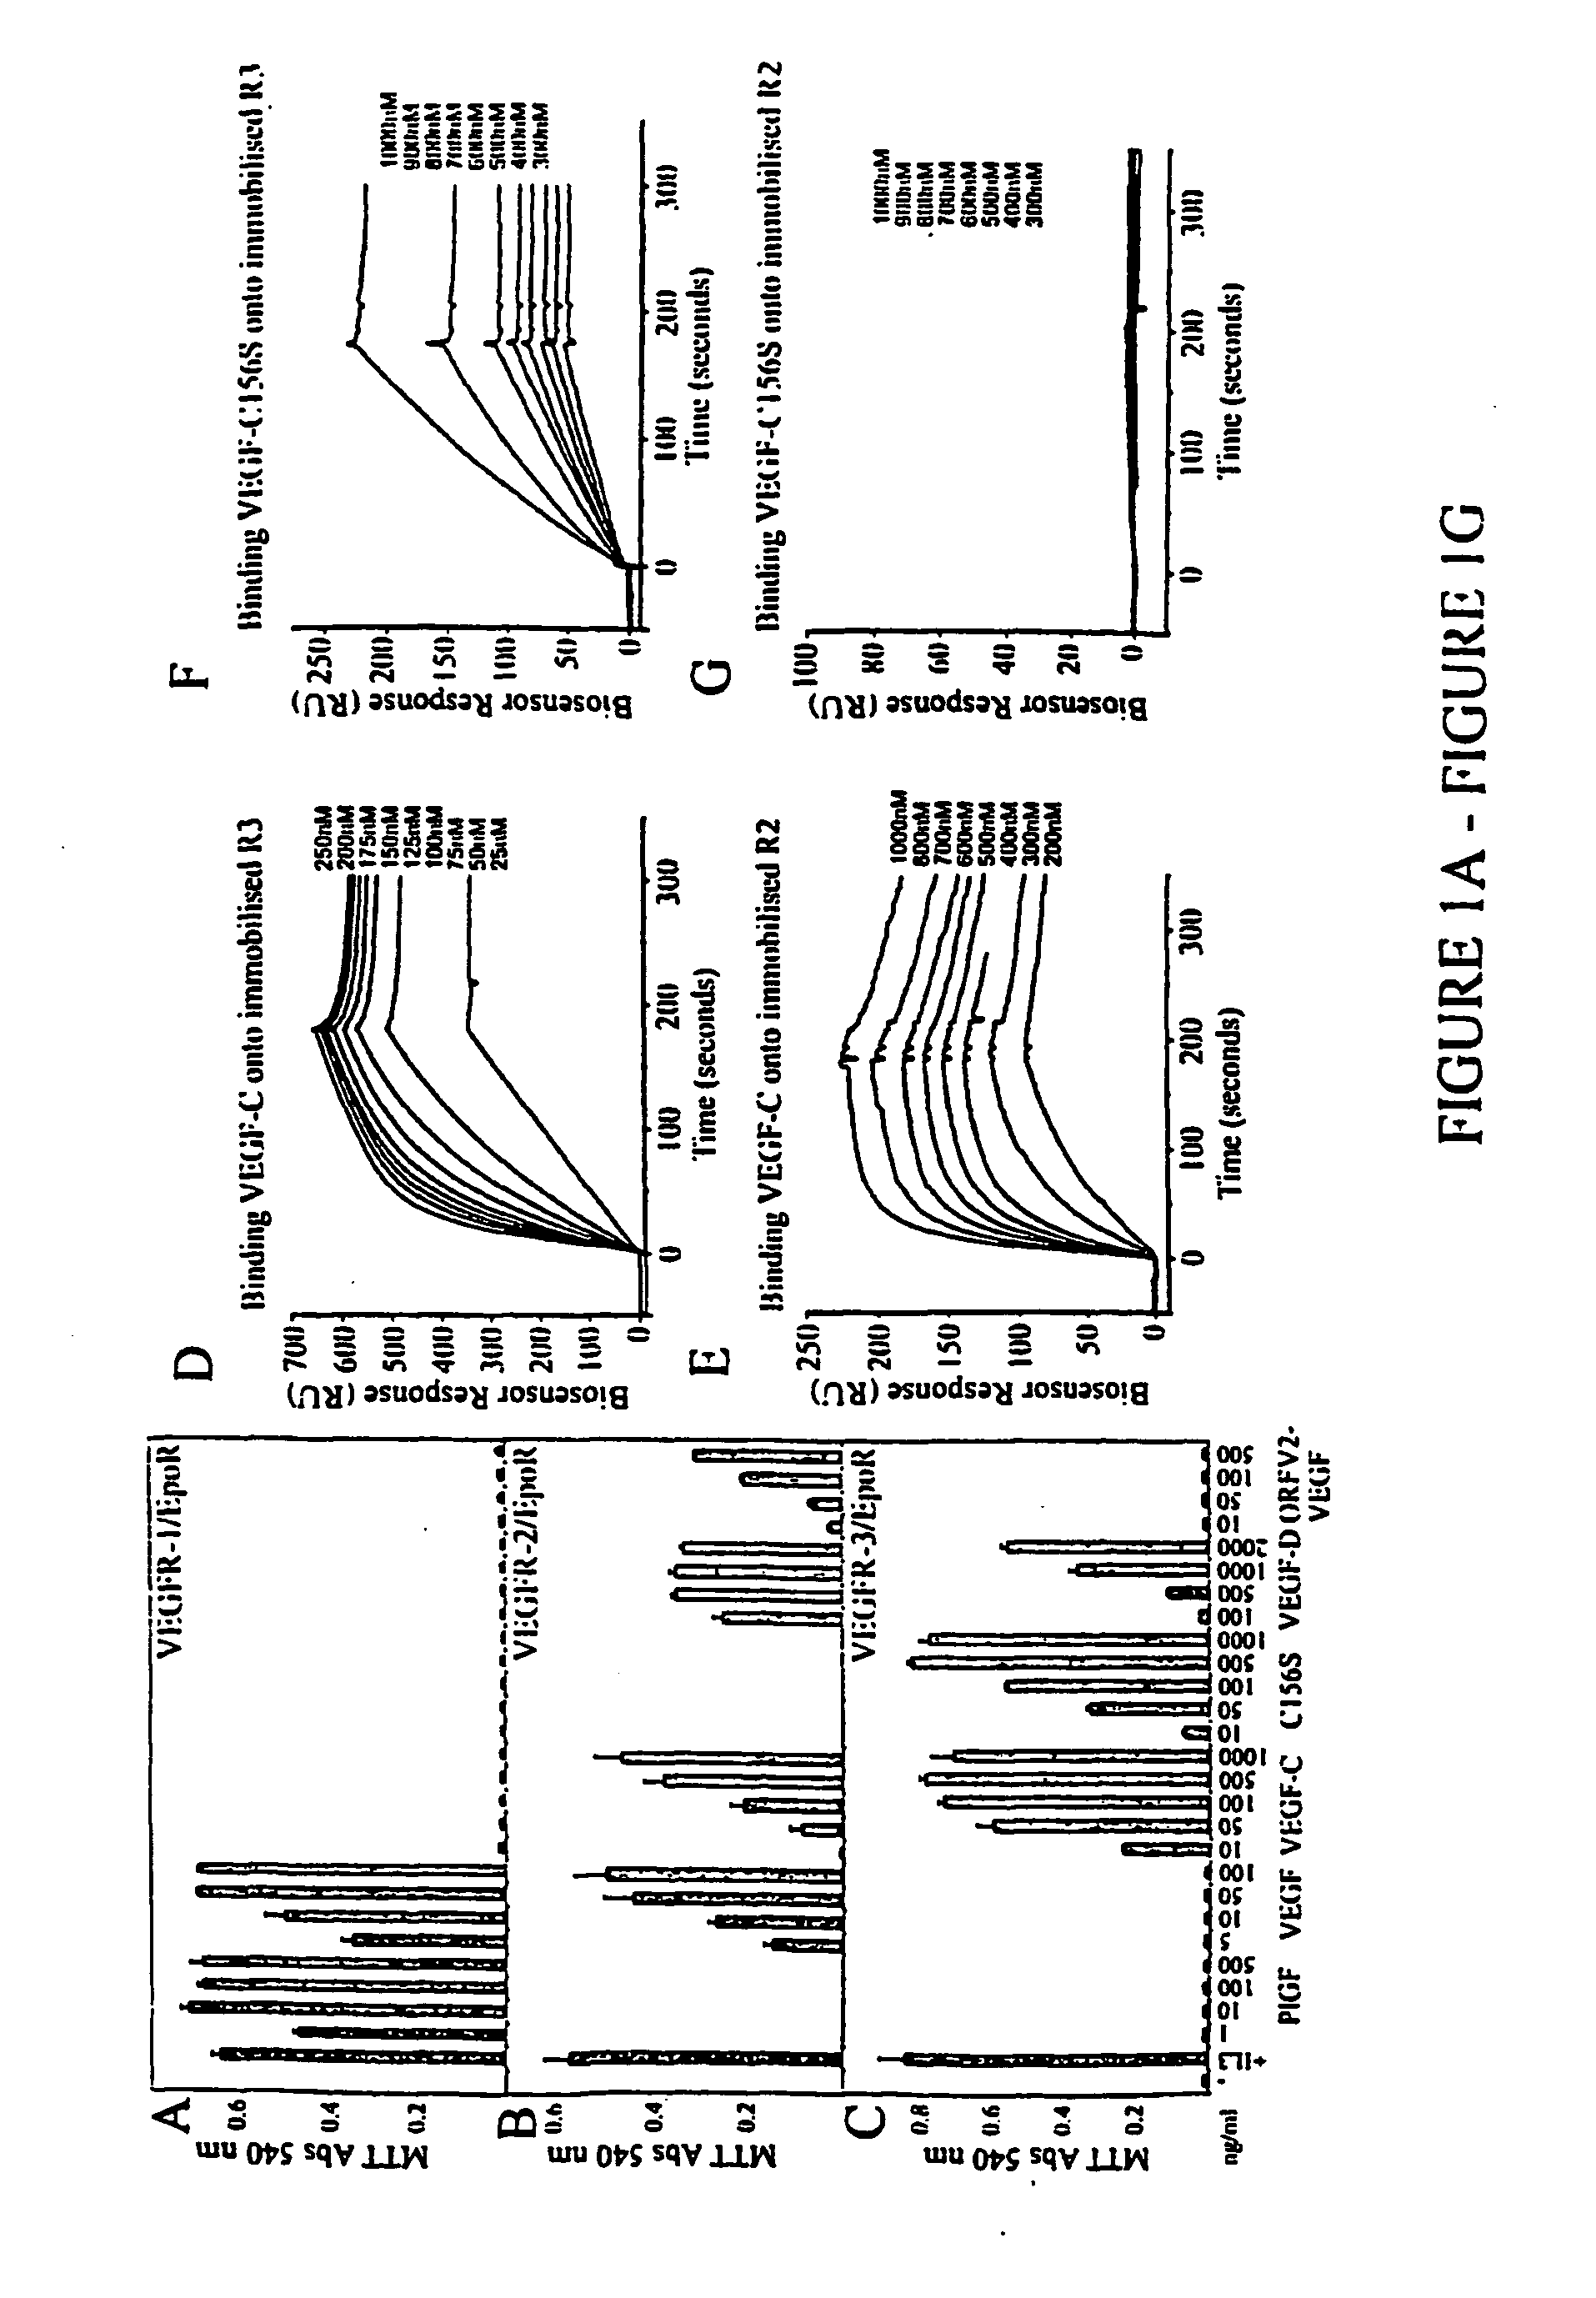 Lymphatic endothelial cells materials and methods